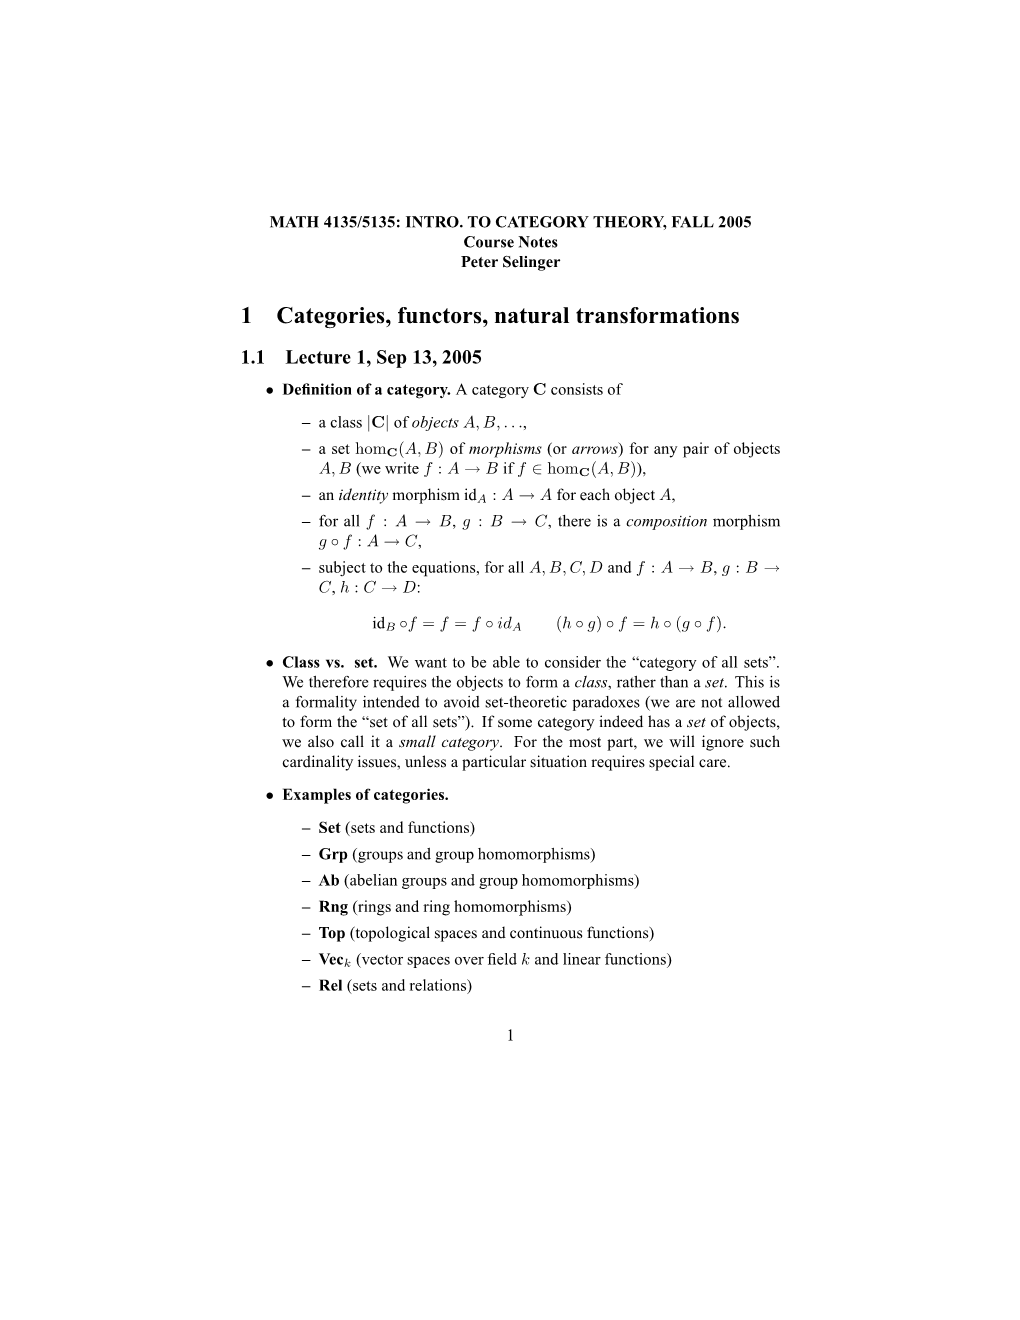 1 Categories, Functors, Natural Transformations 1.1 Lecture 1, Sep 13, 2005 • Deﬁnition of a Category